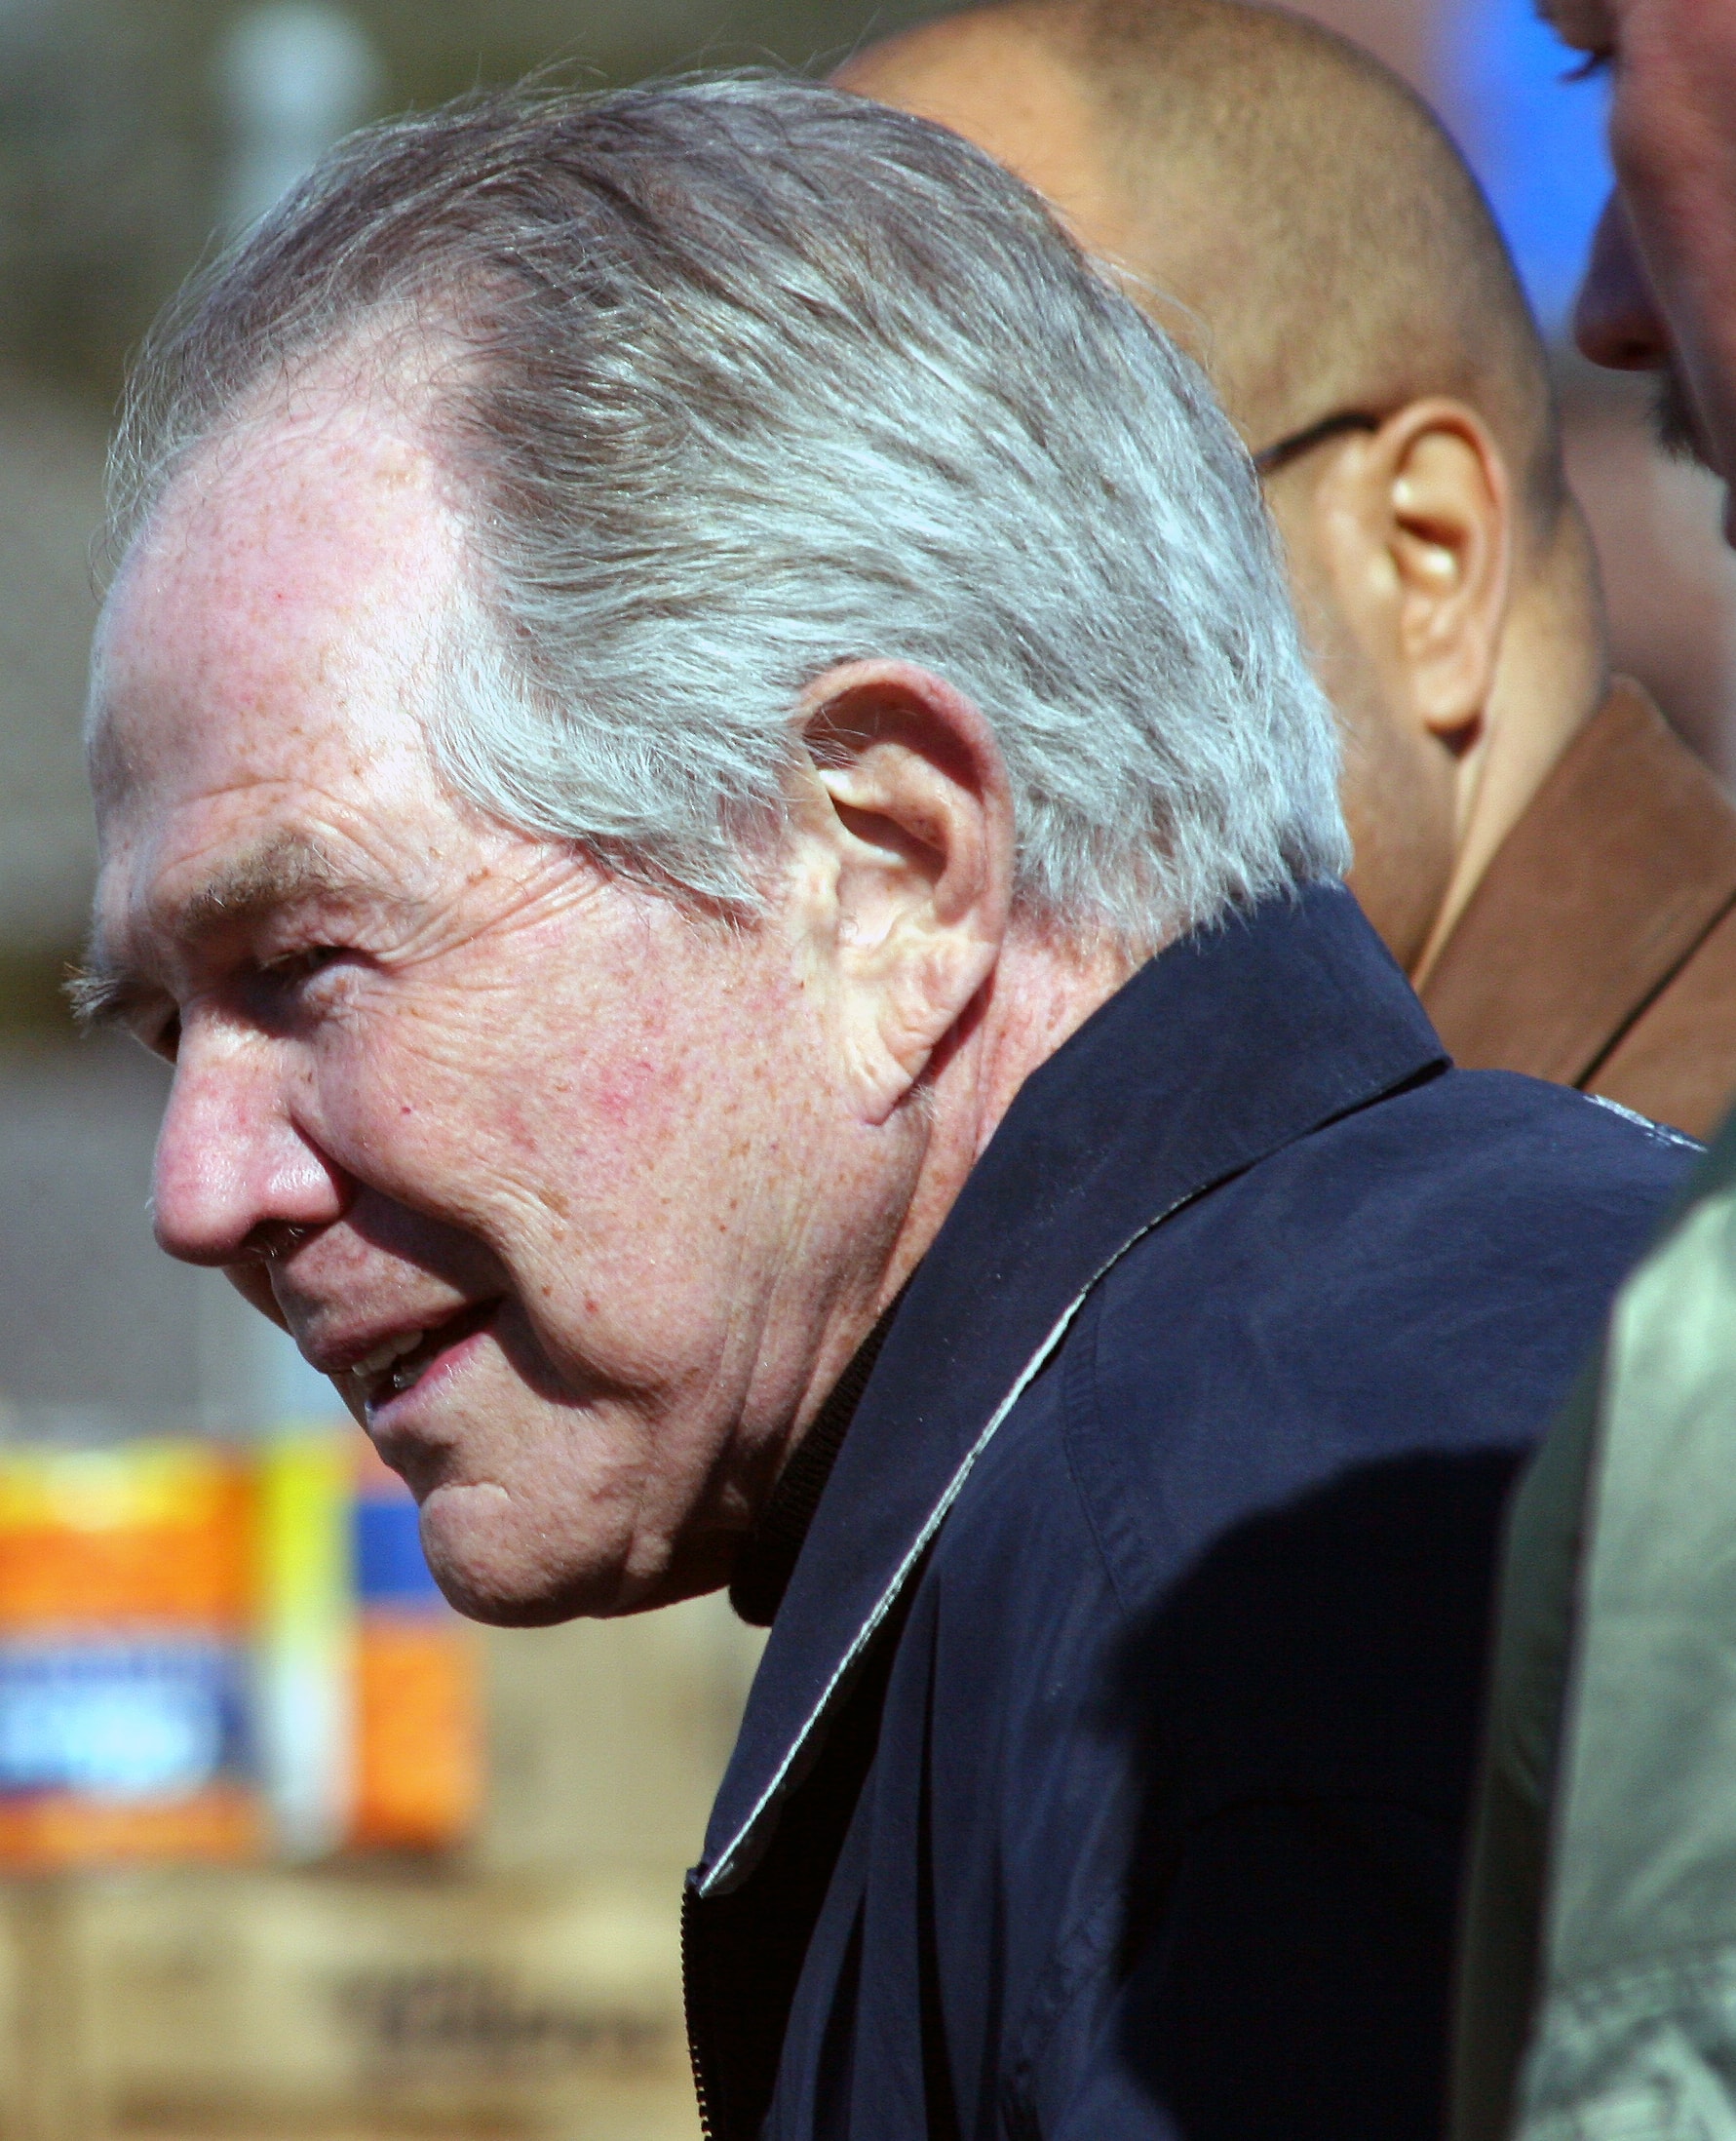 Following the death and passing of Dr. Pat Robertson, various Christian leaders have issued statements reflecting on his life and legacy